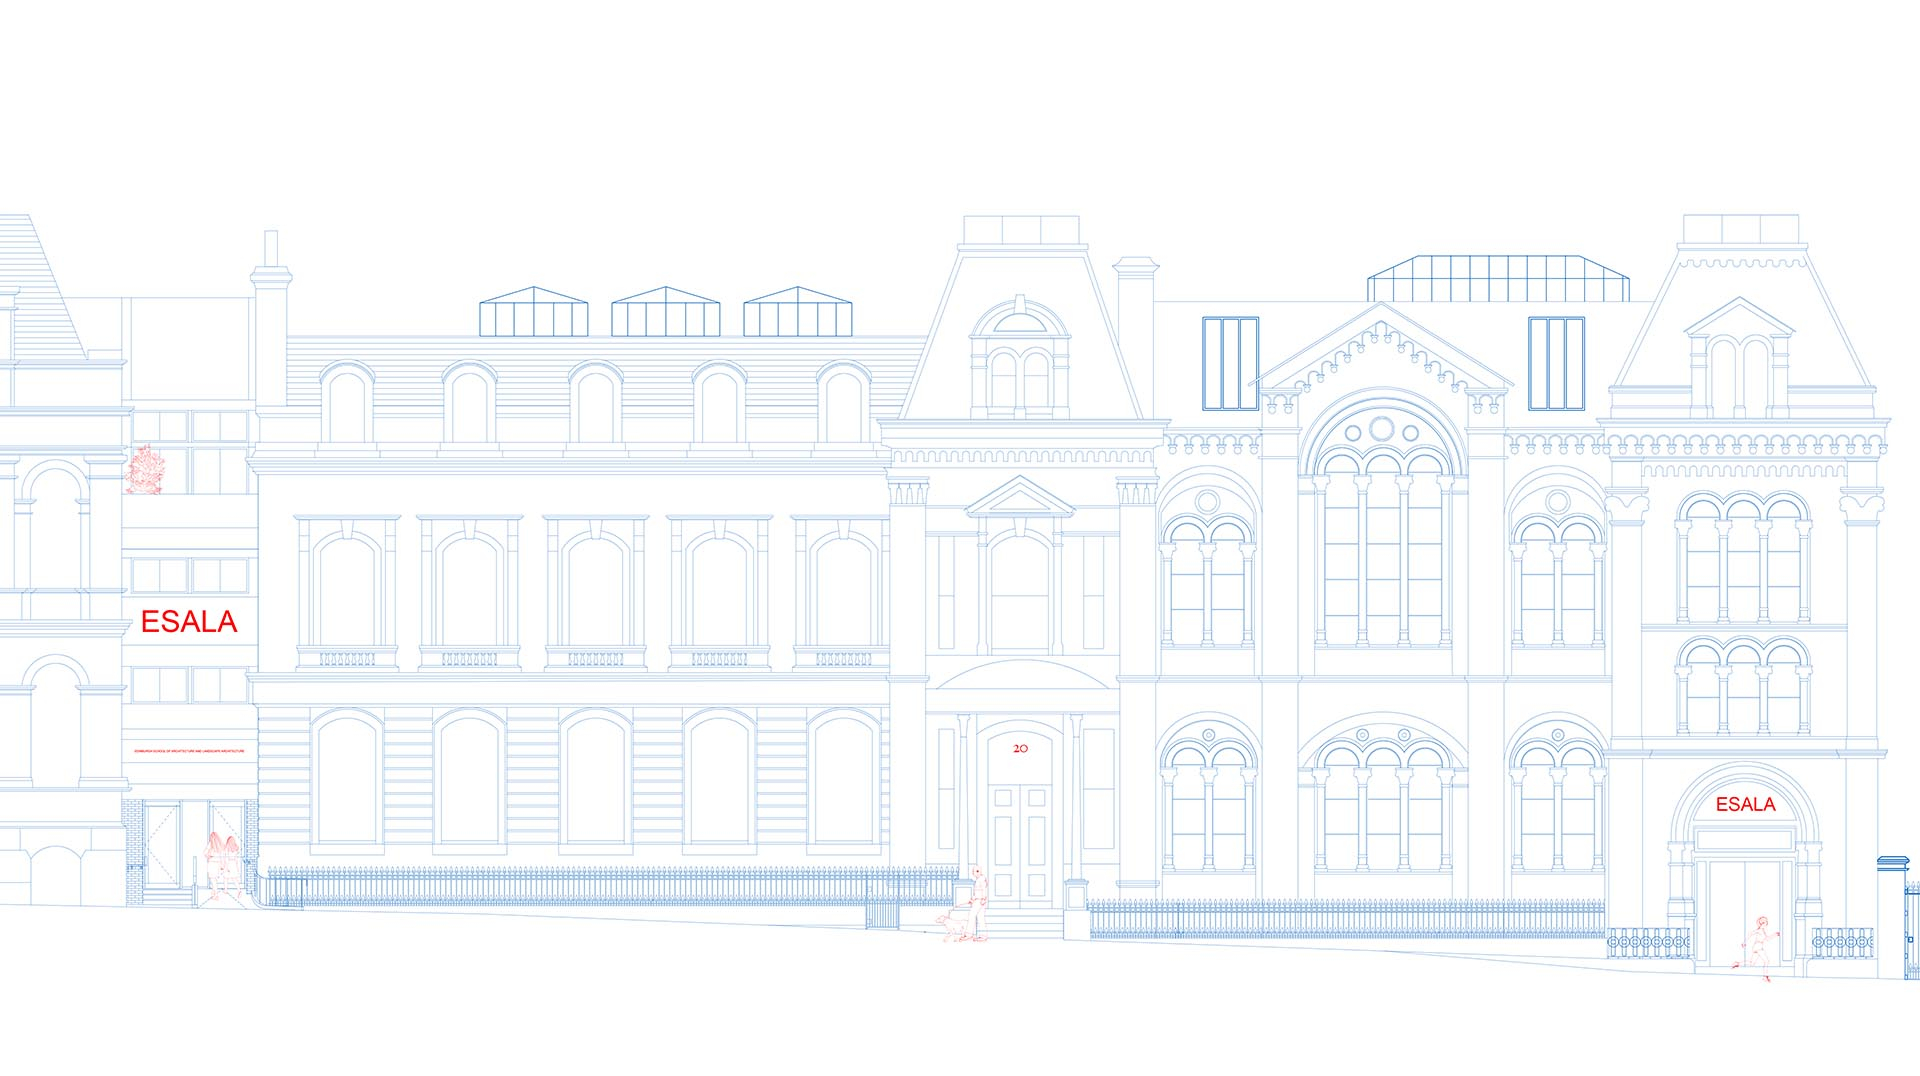 Elevation drawing of the front façade of the building, Minto House in Chambers Street